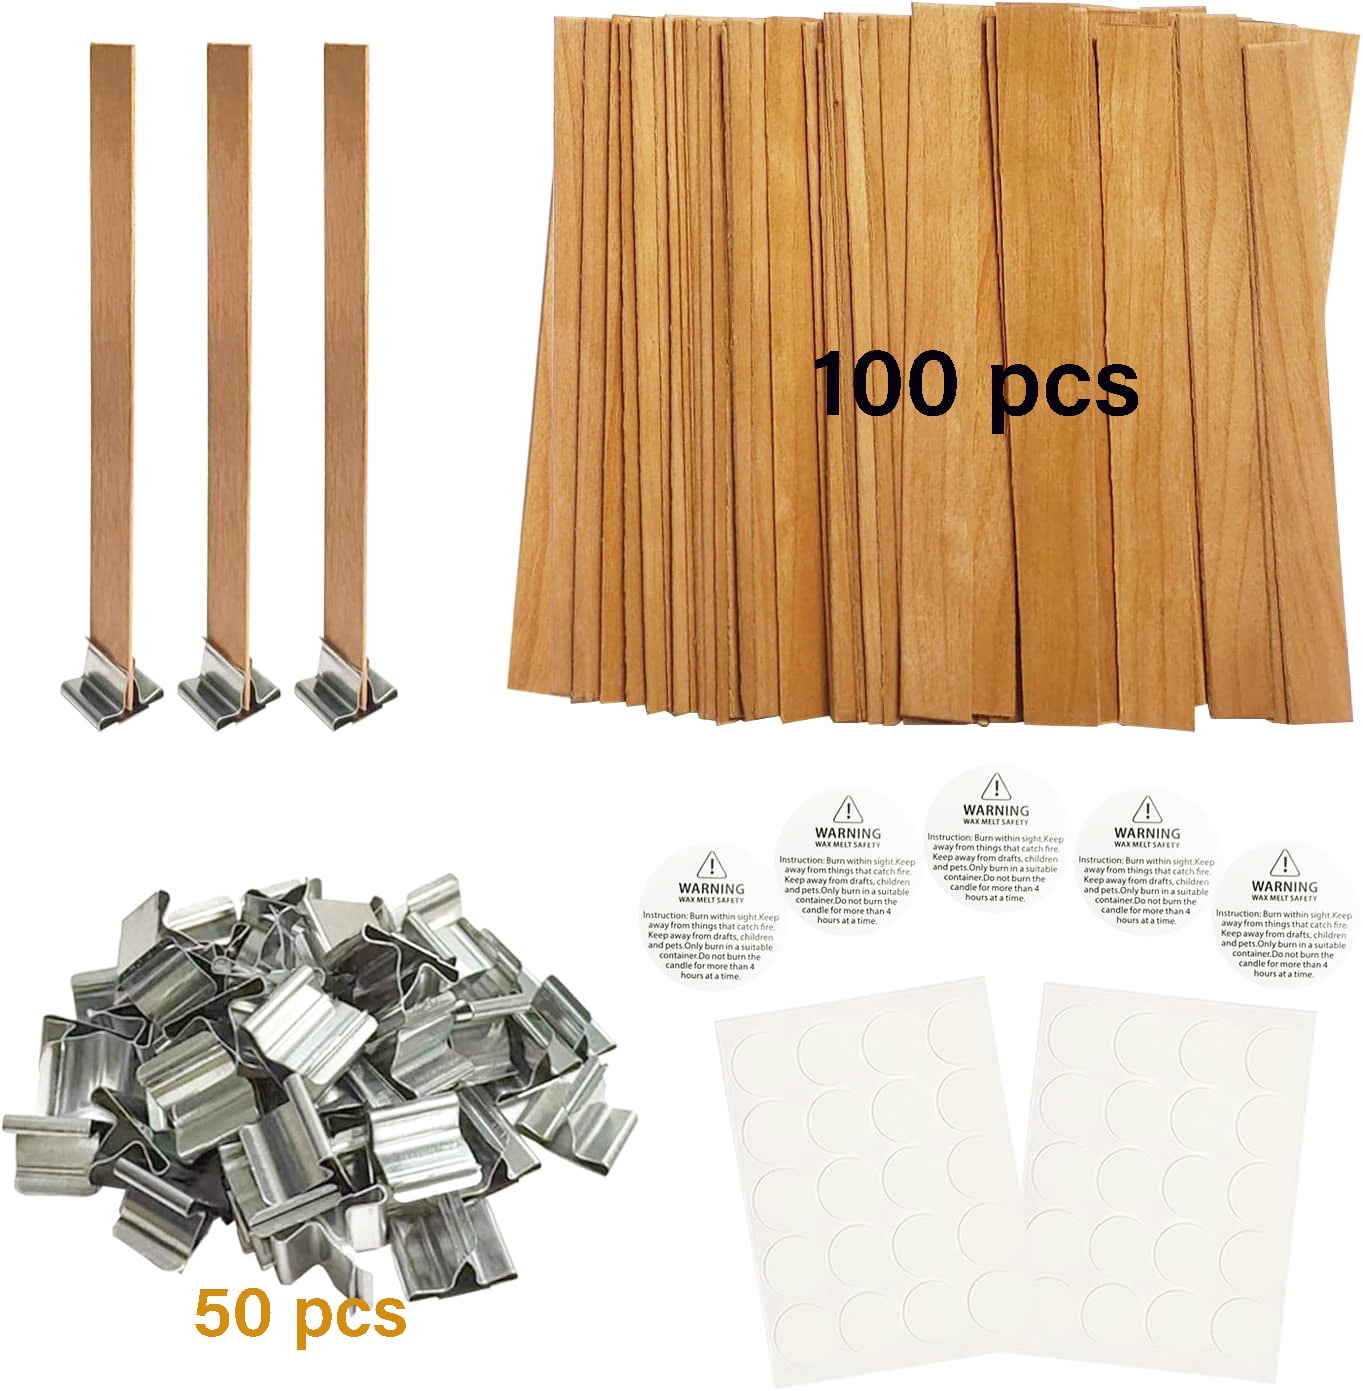  300 Pcs Wooden Candle Wicks Crackling Wicks 5.1 X 0.5 Inch 100%  Natural Wood Wicks with Stand Candle Cores for DIY Candle Making Craft  Wooden Wicks for Candle Making Wood Wick : Everything Else